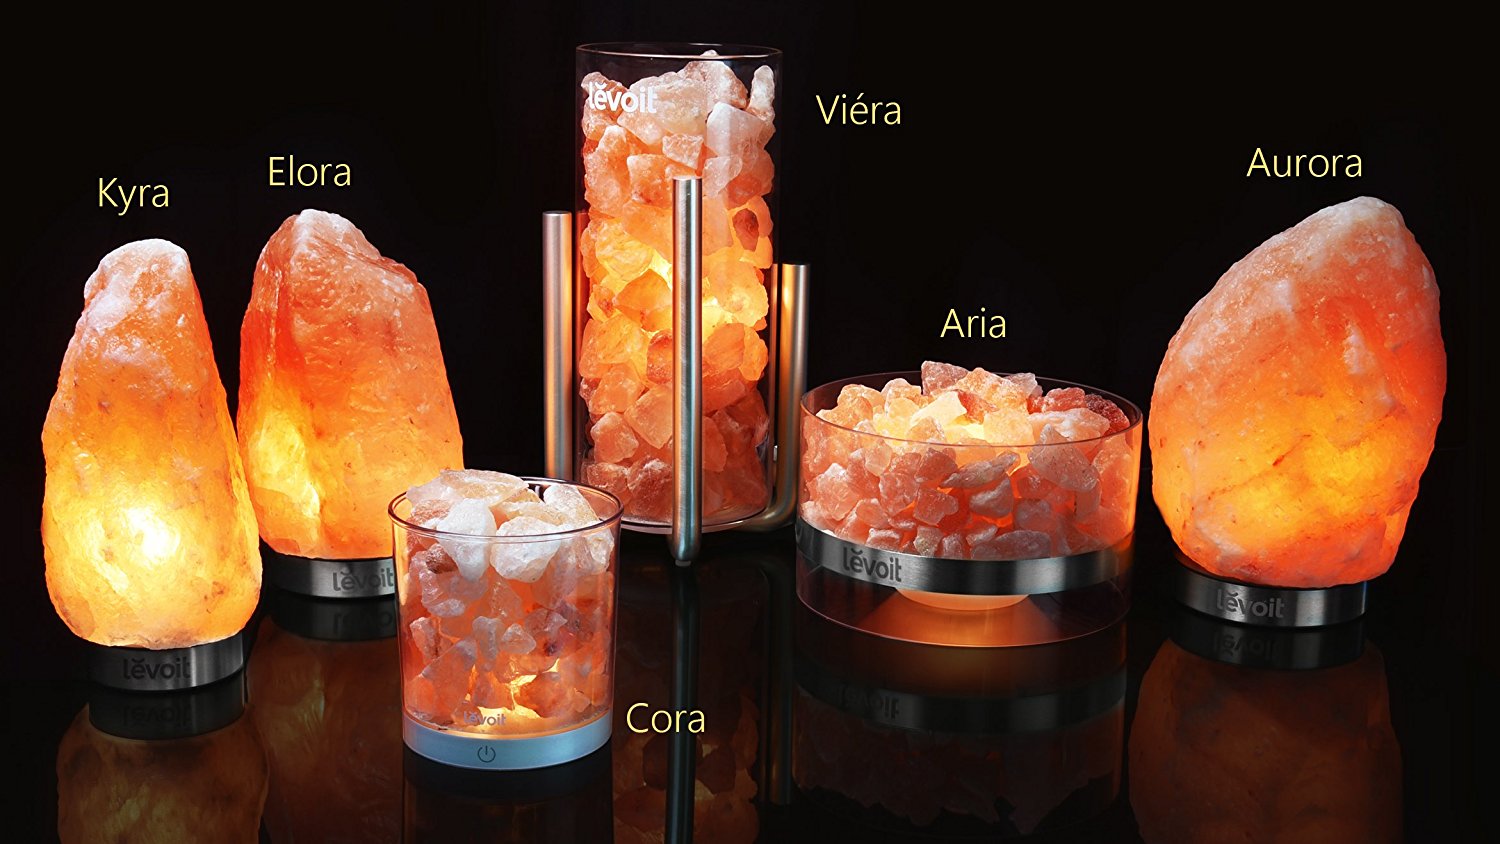 Feng Shui Decor With Beautiful Himalayan Salt Lamp That Brings Instant Serenity, Calmness and Air Purification... Ahhh